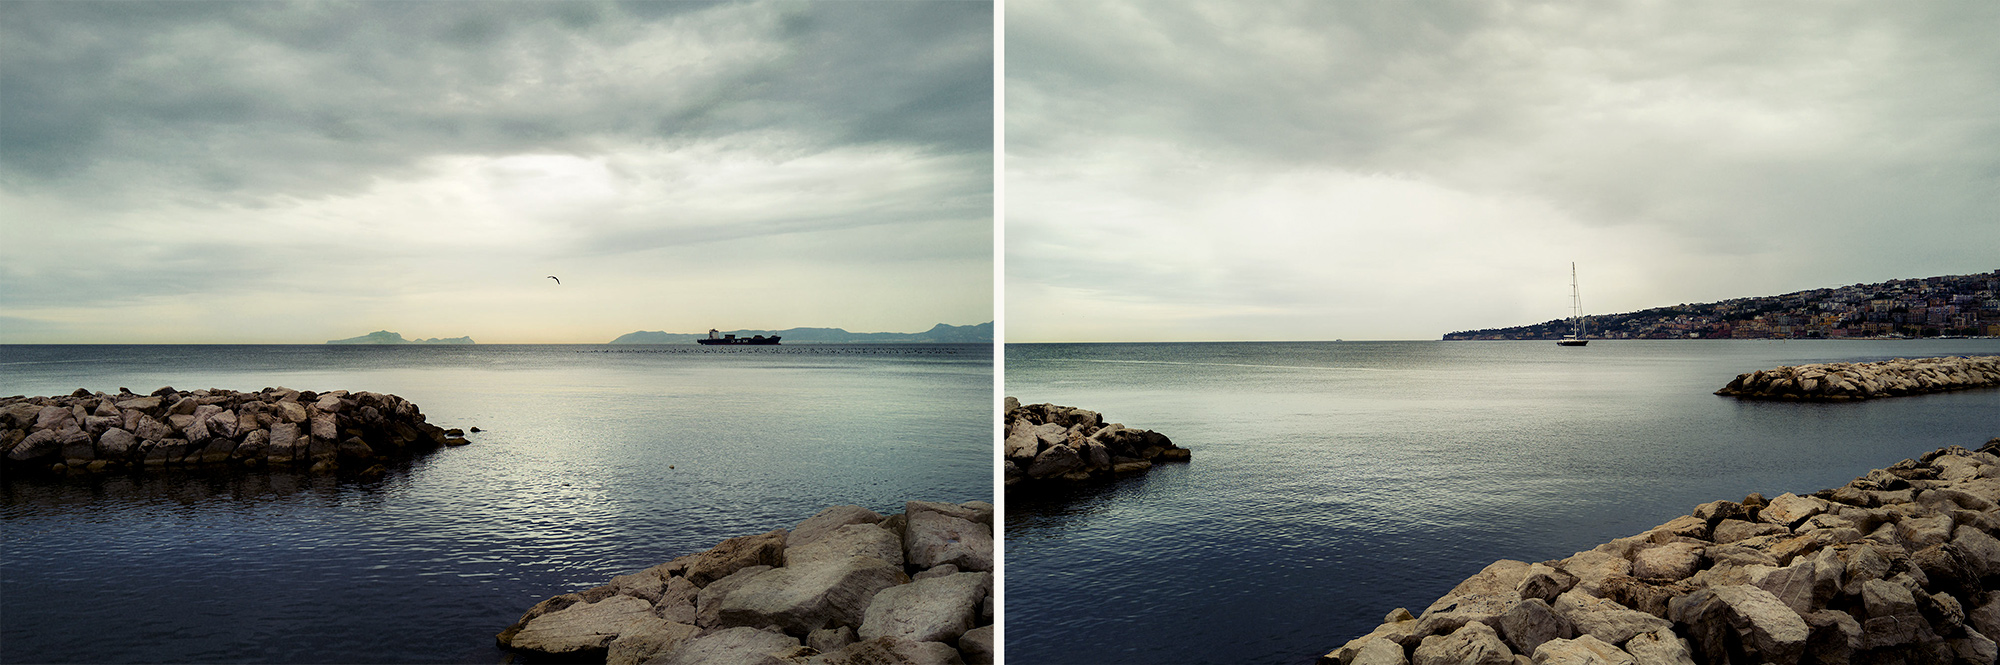 Good Boy Wolf Photographer, filmic landscape,  Napoli land and sea, tranquil water 